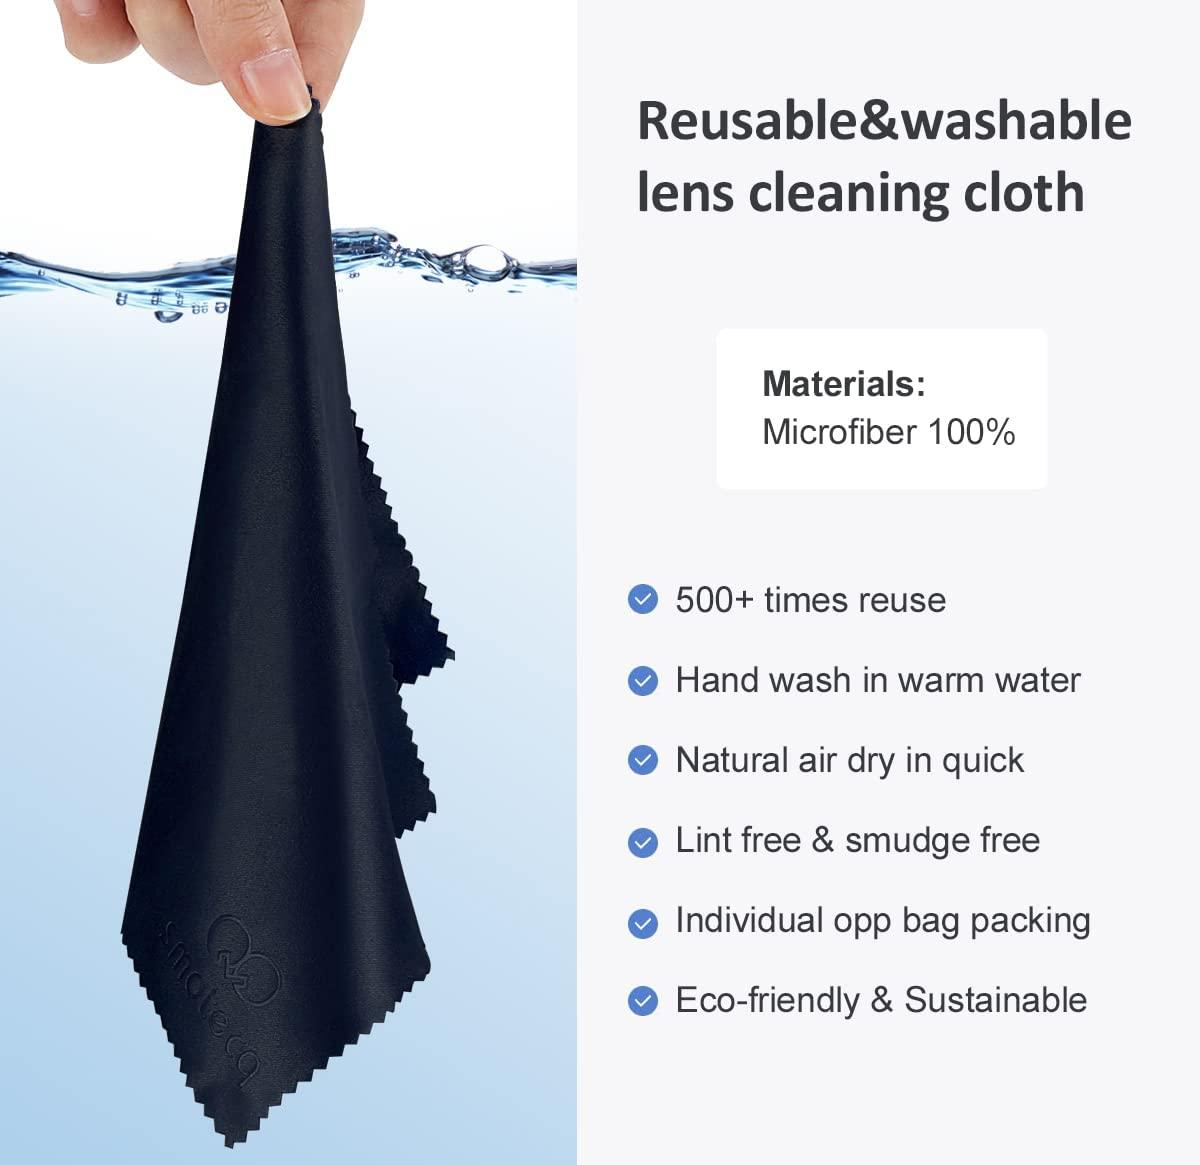 Glasses Cleaning Cloth, Premium Microfiber Lens and Screen Cleaner, Reusable and Washable - Pack of 8, 7 x 6-Inch, Blue Grey 6" x 8 Pack